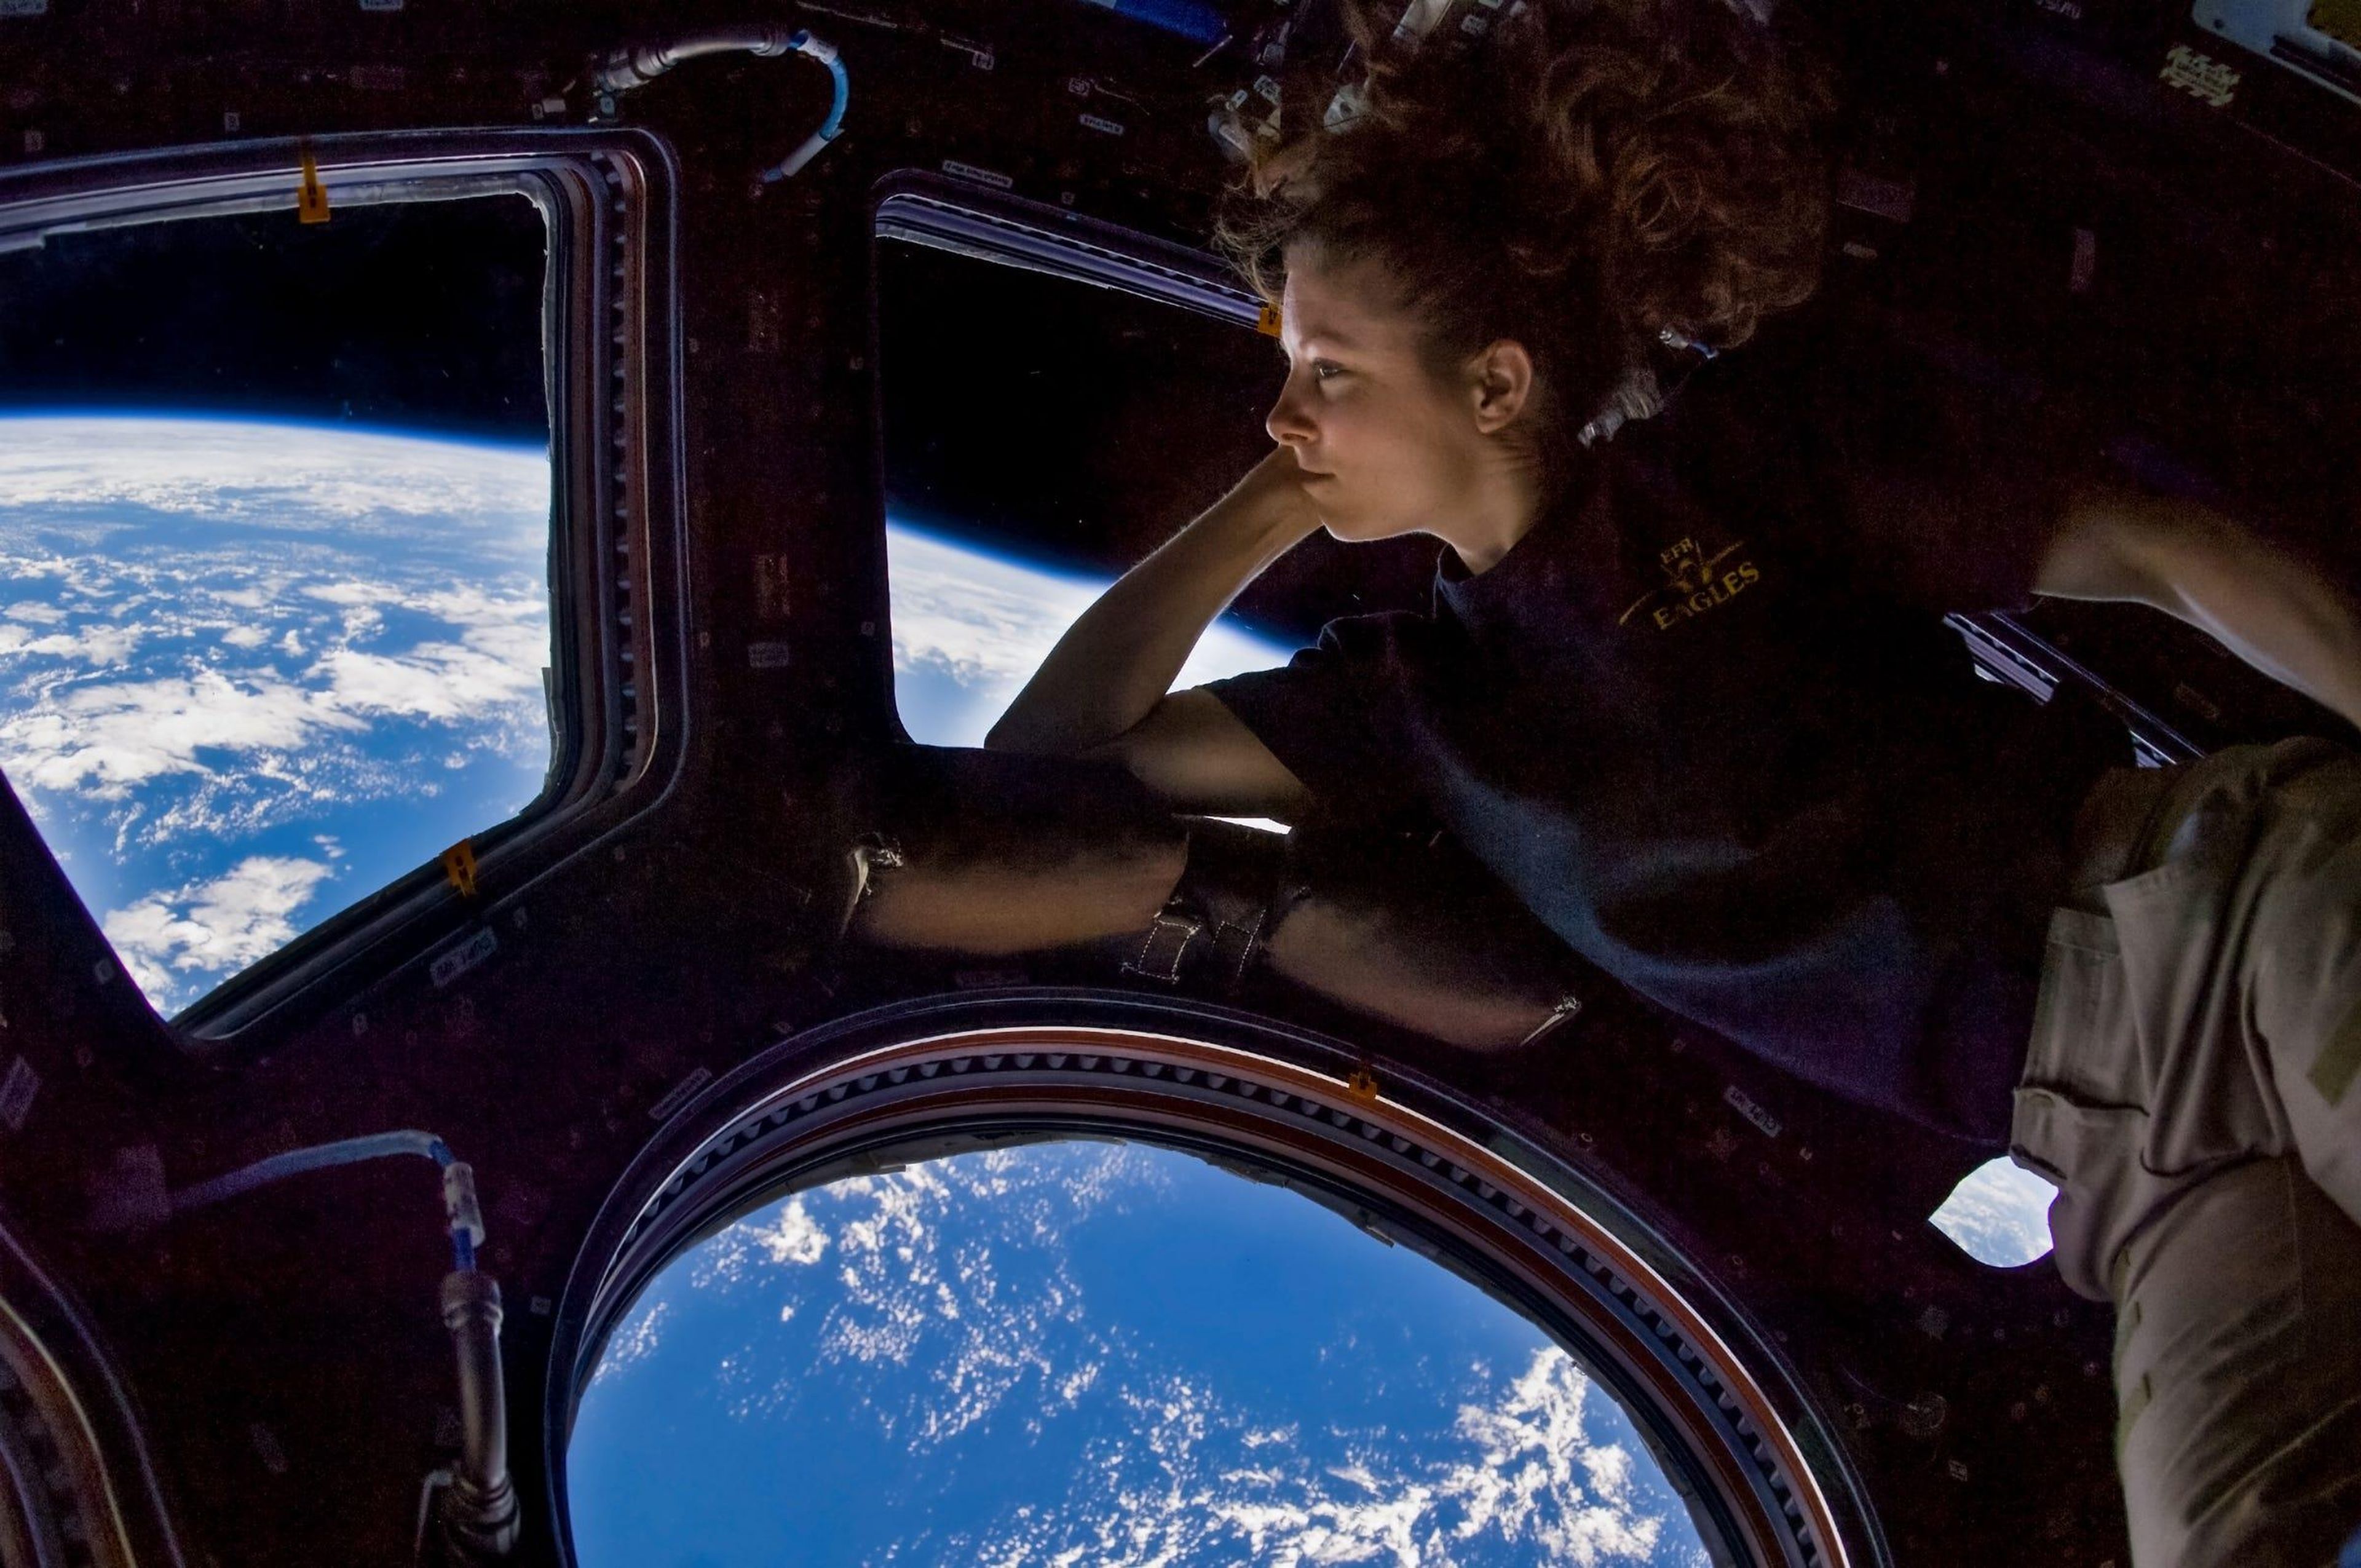 NASA astronaut Tracy Caldwell Dyson, Expedition 24 flight engineer, looks through a window in the Cupola of the International Space Station on September 11, 2010.